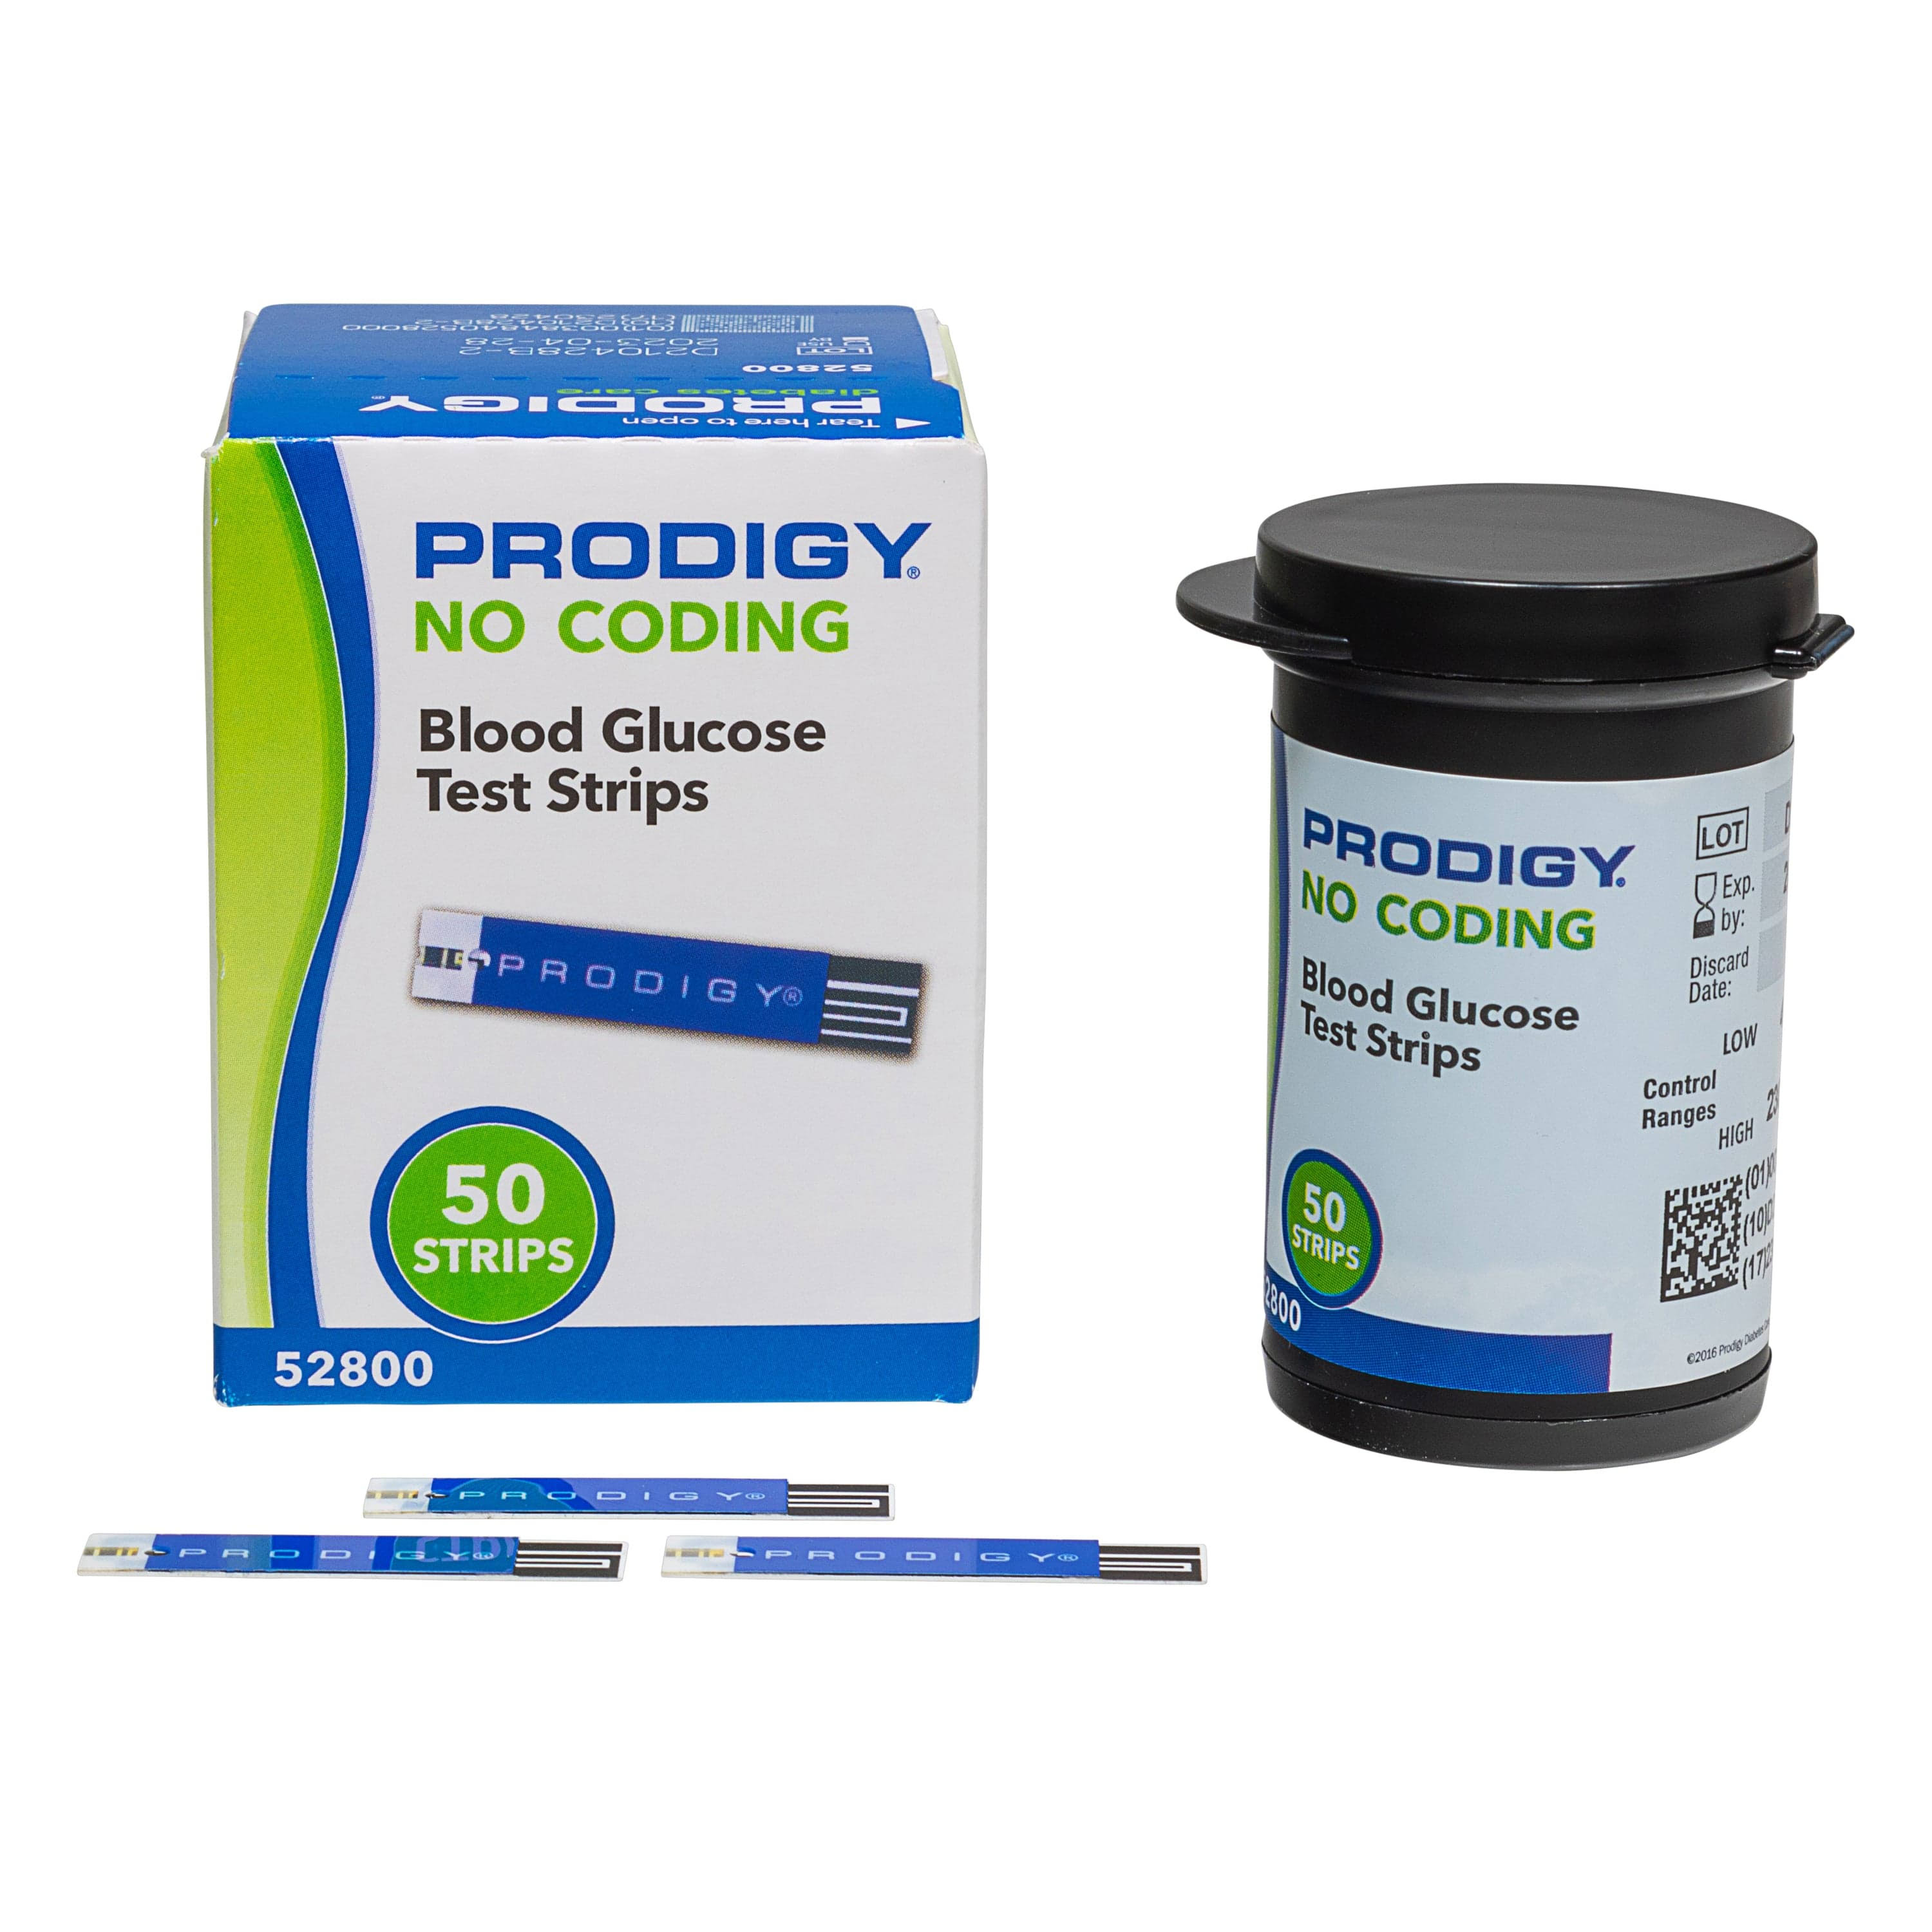 Prodigy No Coding Blood Glucose Test Strips - 300 Count